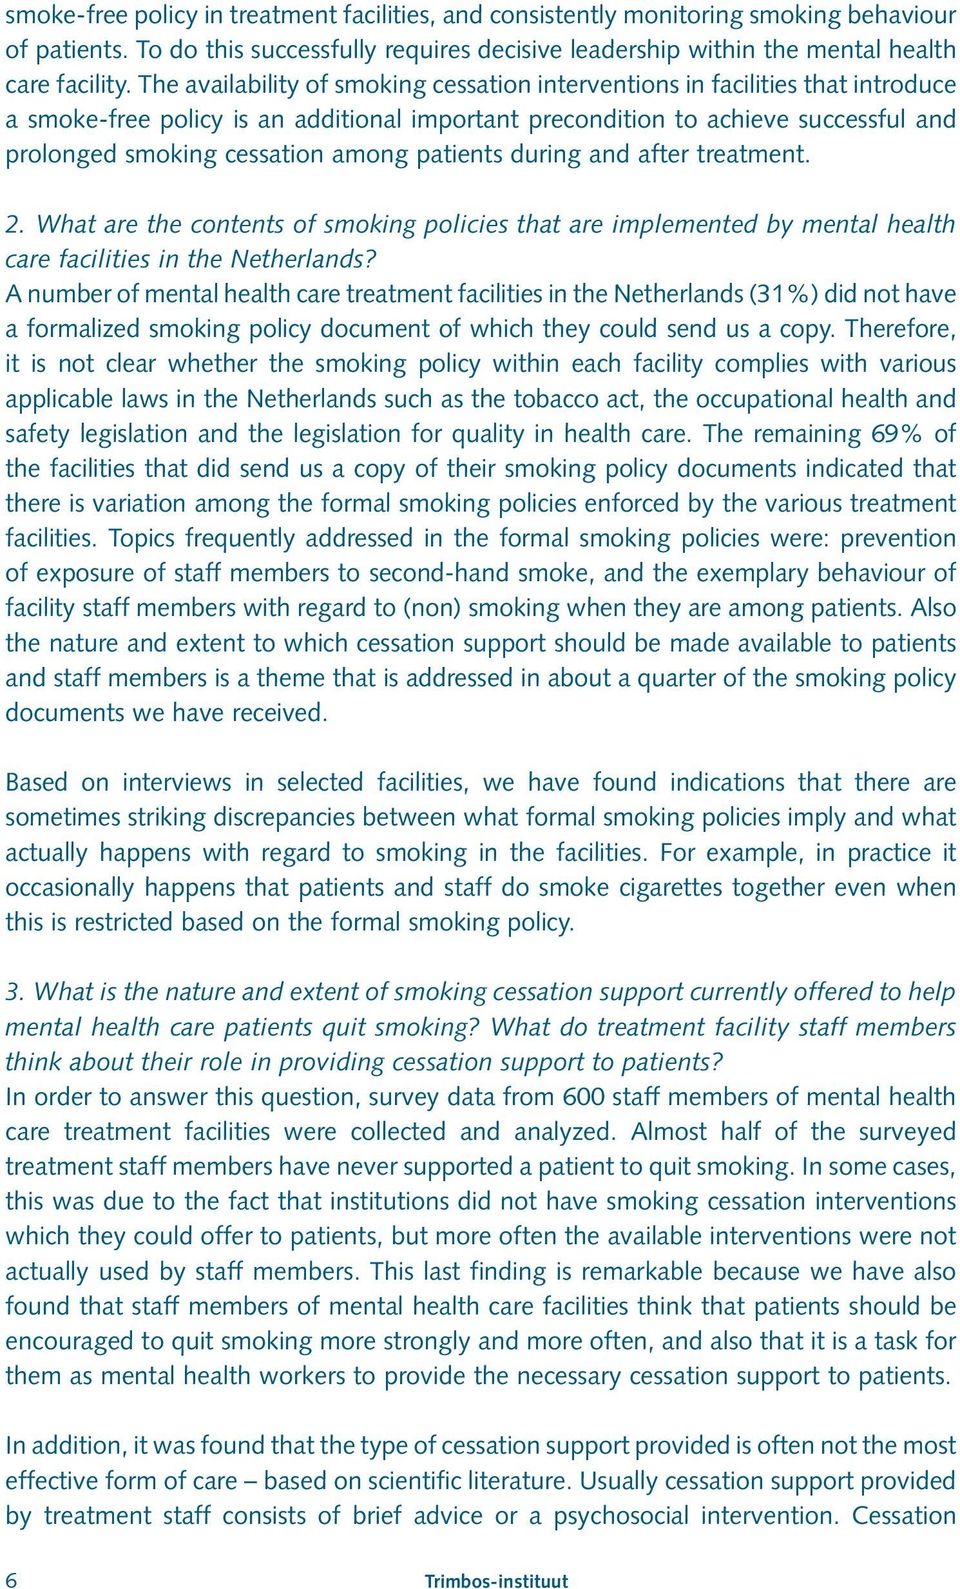 among patients during and after treatment. 2. What are the contents of smoking policies that are implemented by mental health care facilities in the Netherlands?